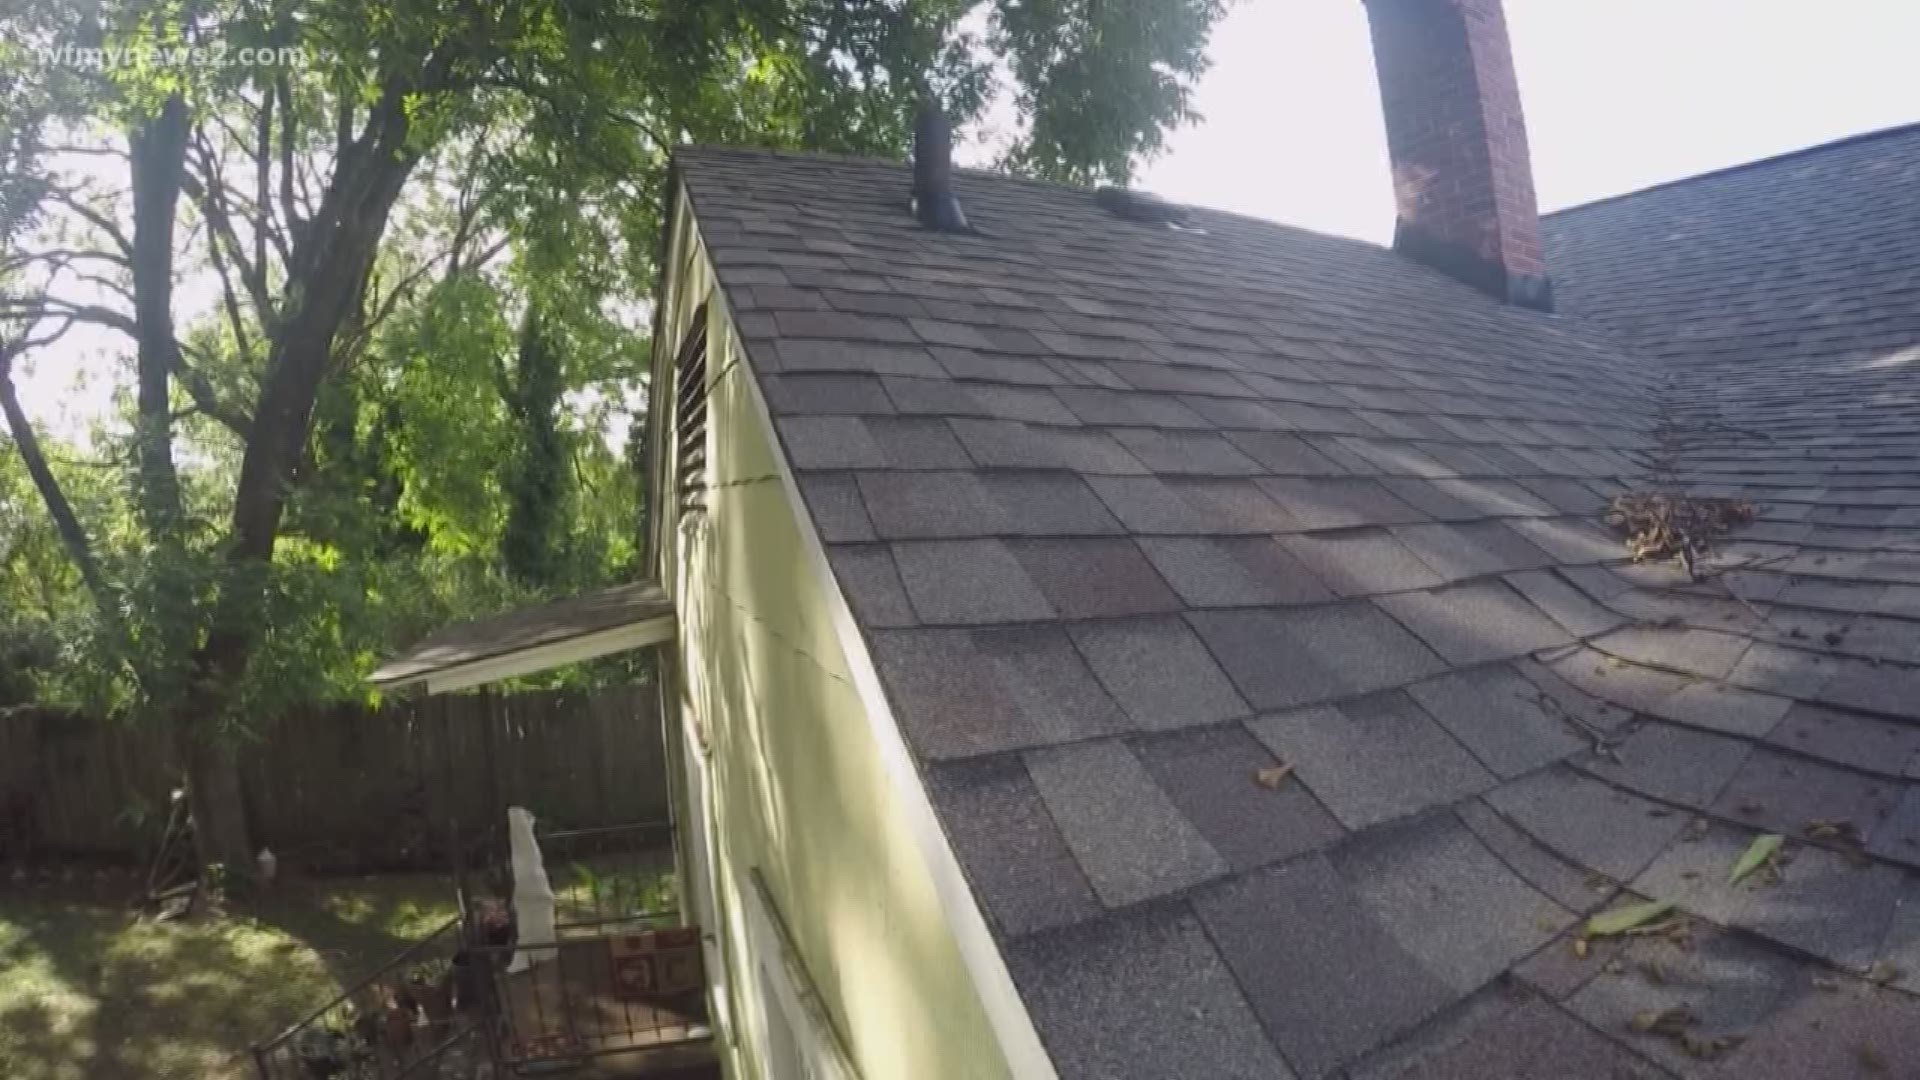 A woman had a tarp on her roof as a way to stop leaks. Eventually, she hired a man to fix it. Problem is, he didn’t.